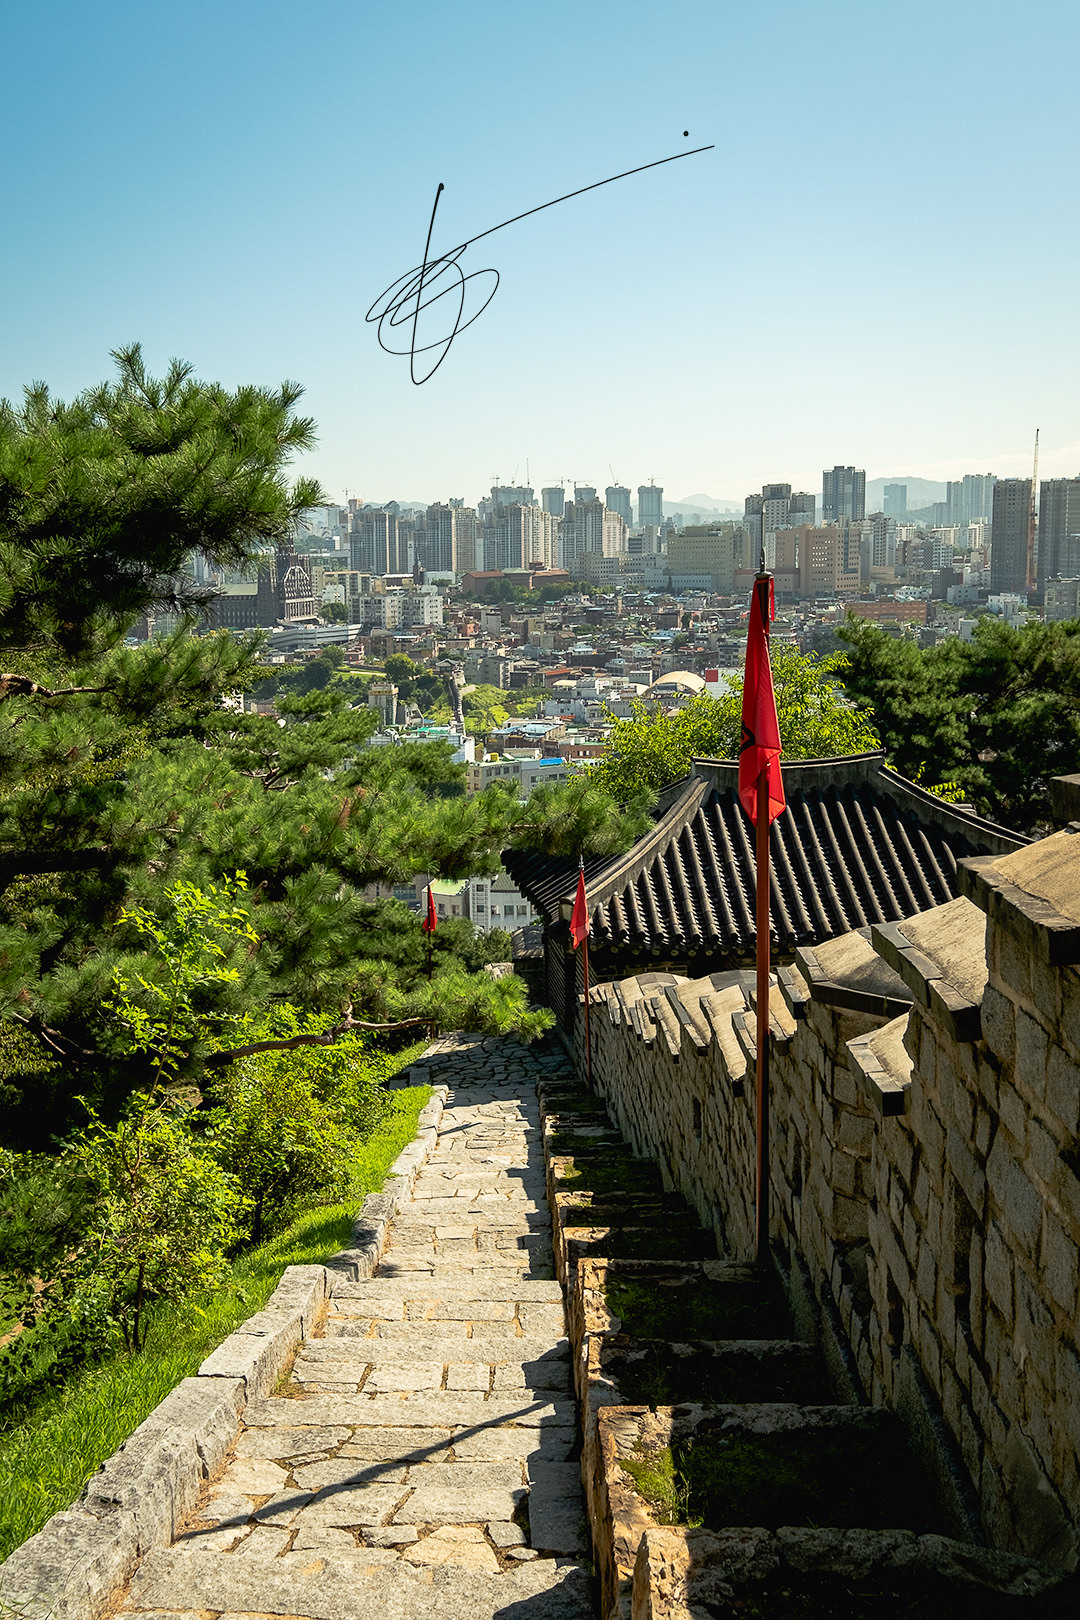 Suwon. The steep steps to climb on top of the walls of the Suwon fortress